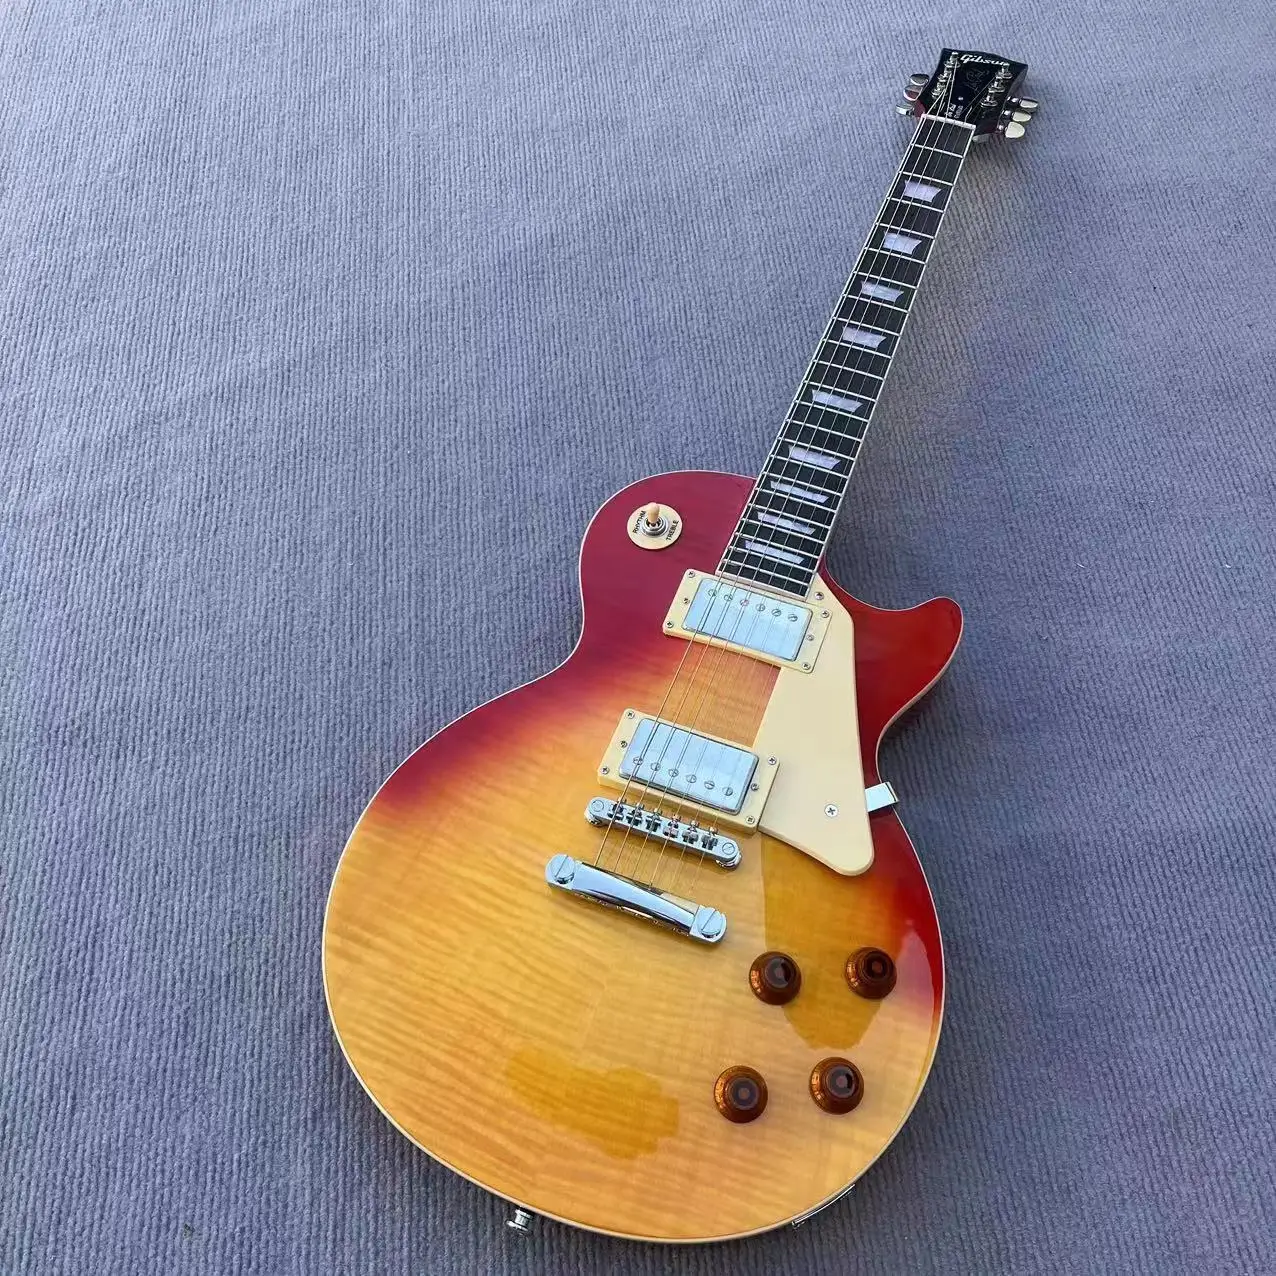 Send in 3 days Flame Maple Top G Les Standard Brown LP Paul Electric Guitar in stock  HDFHBFDBN